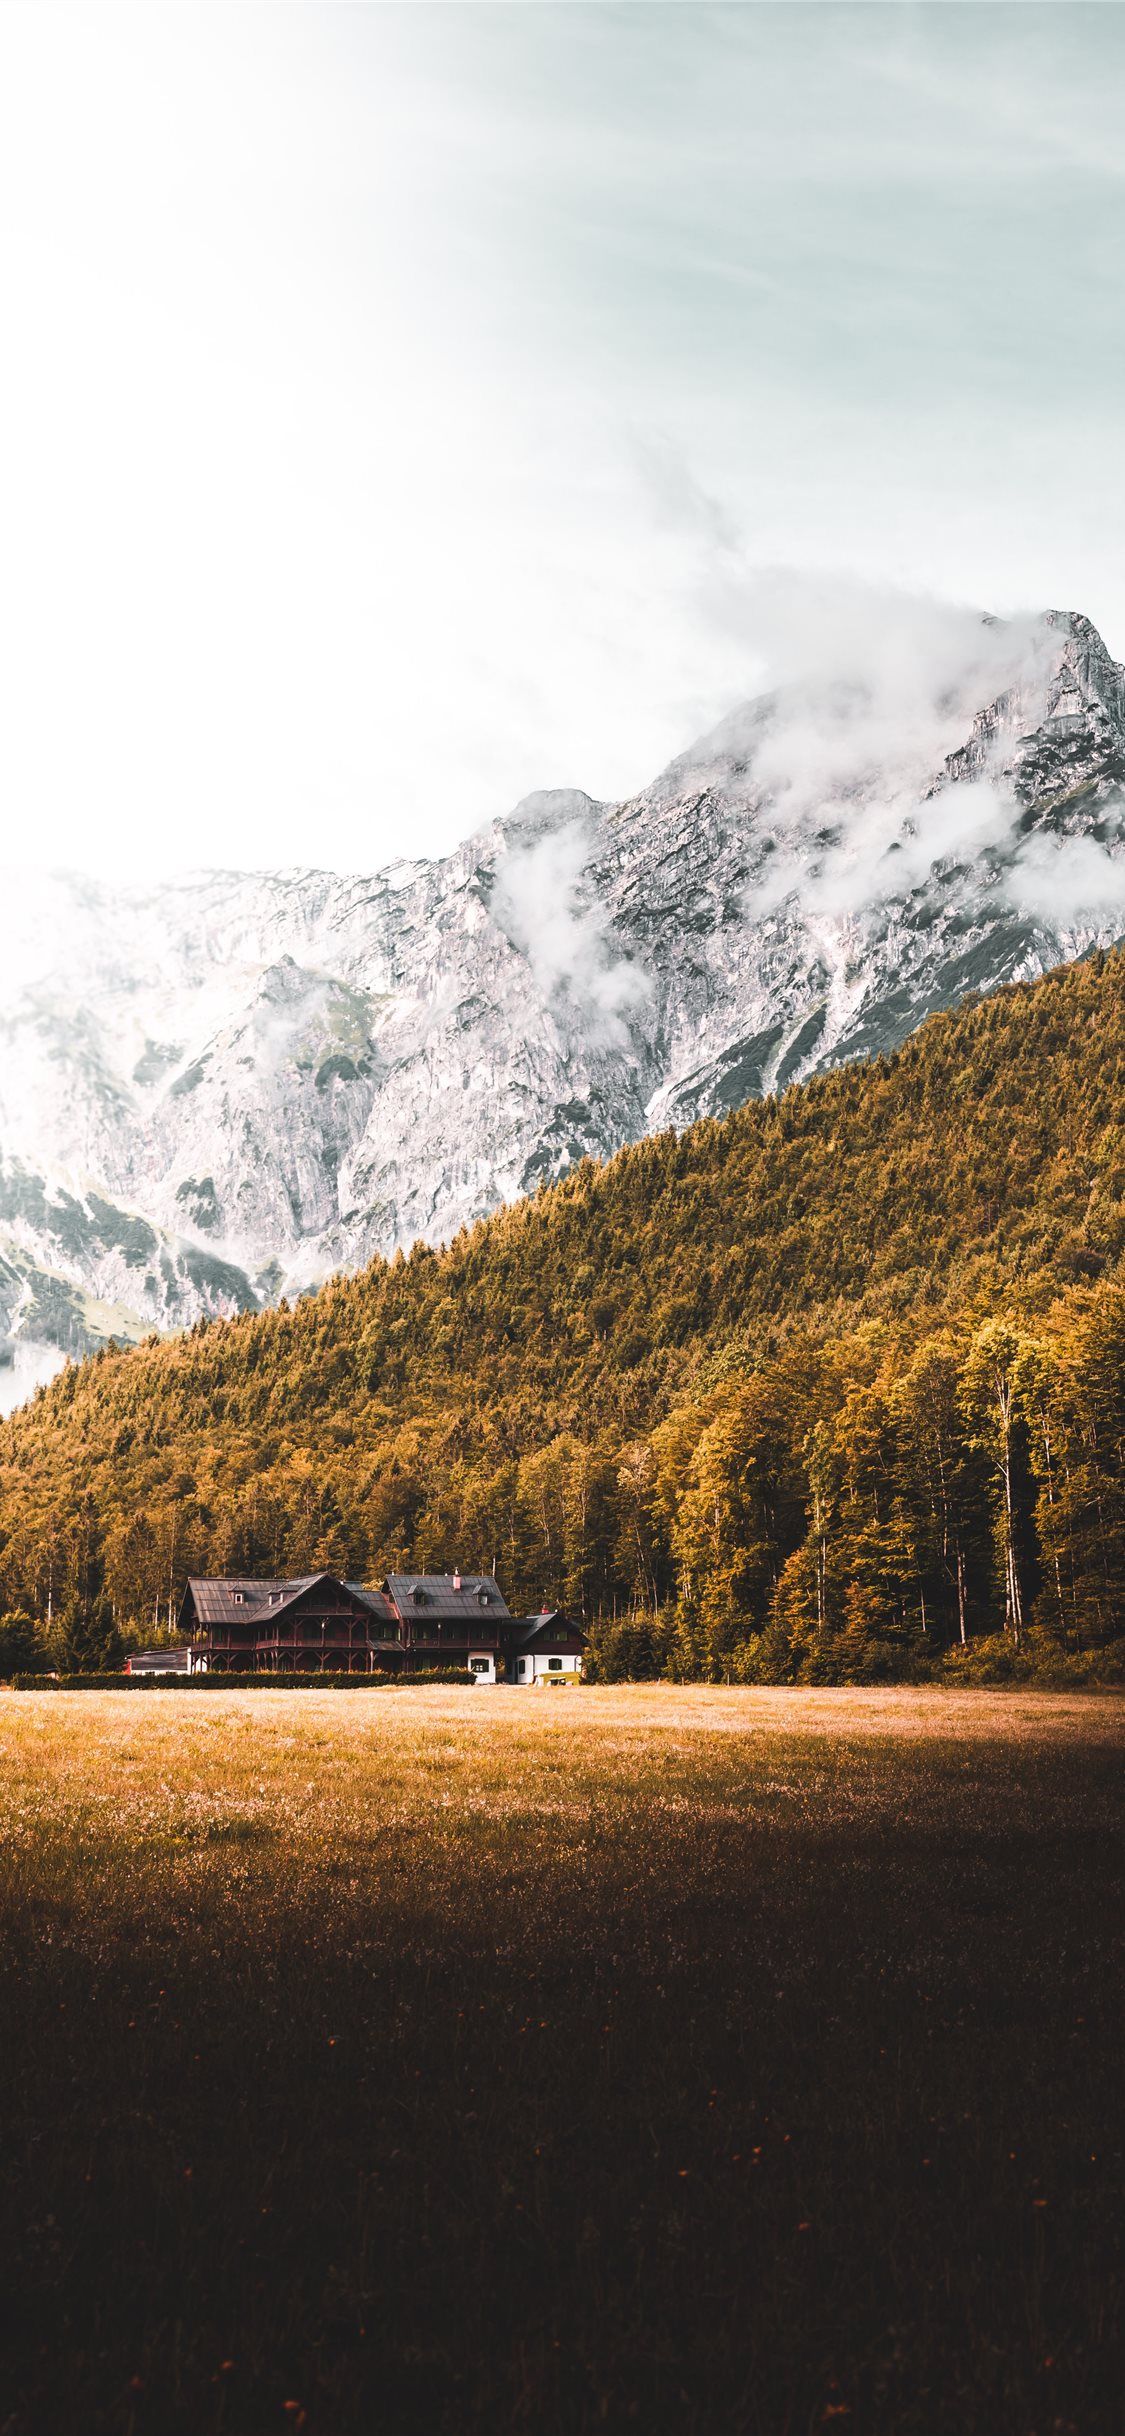 House Forest and Mountain in Austria iPhone X Wallpaper Free Download